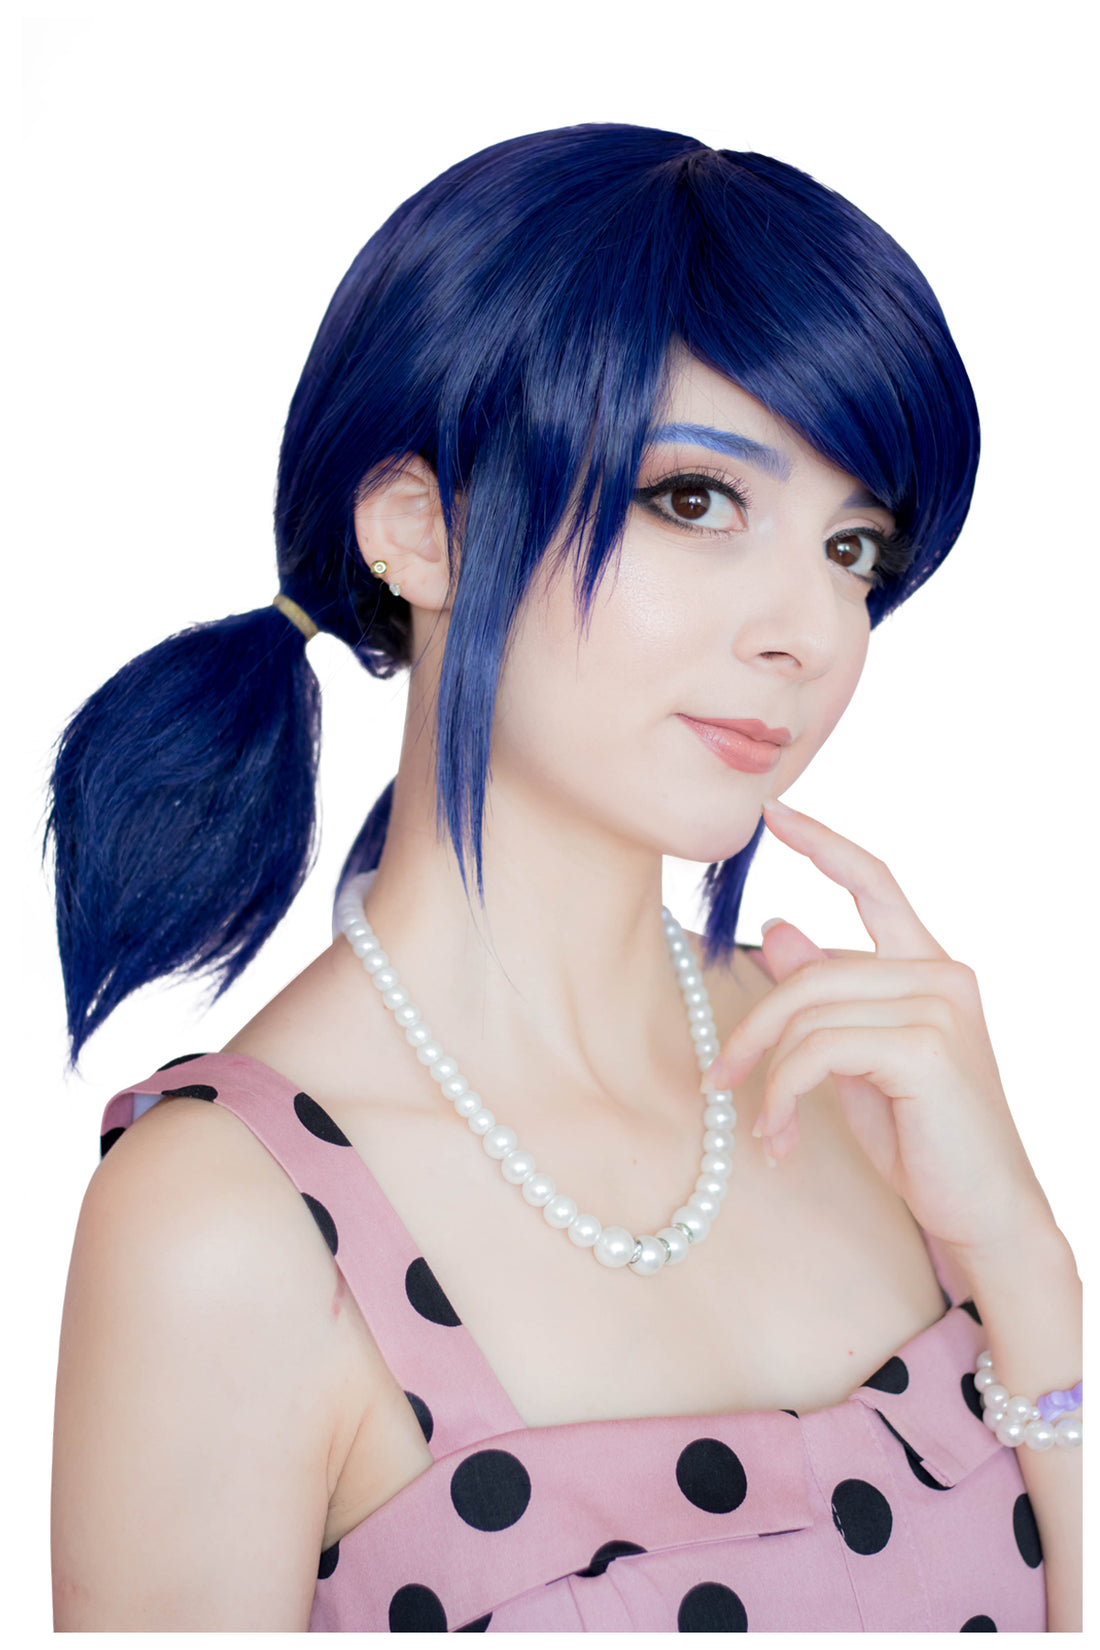 DAZCOS Anime Cosplay Wig For Girls Women Blue Hair With Red Rope